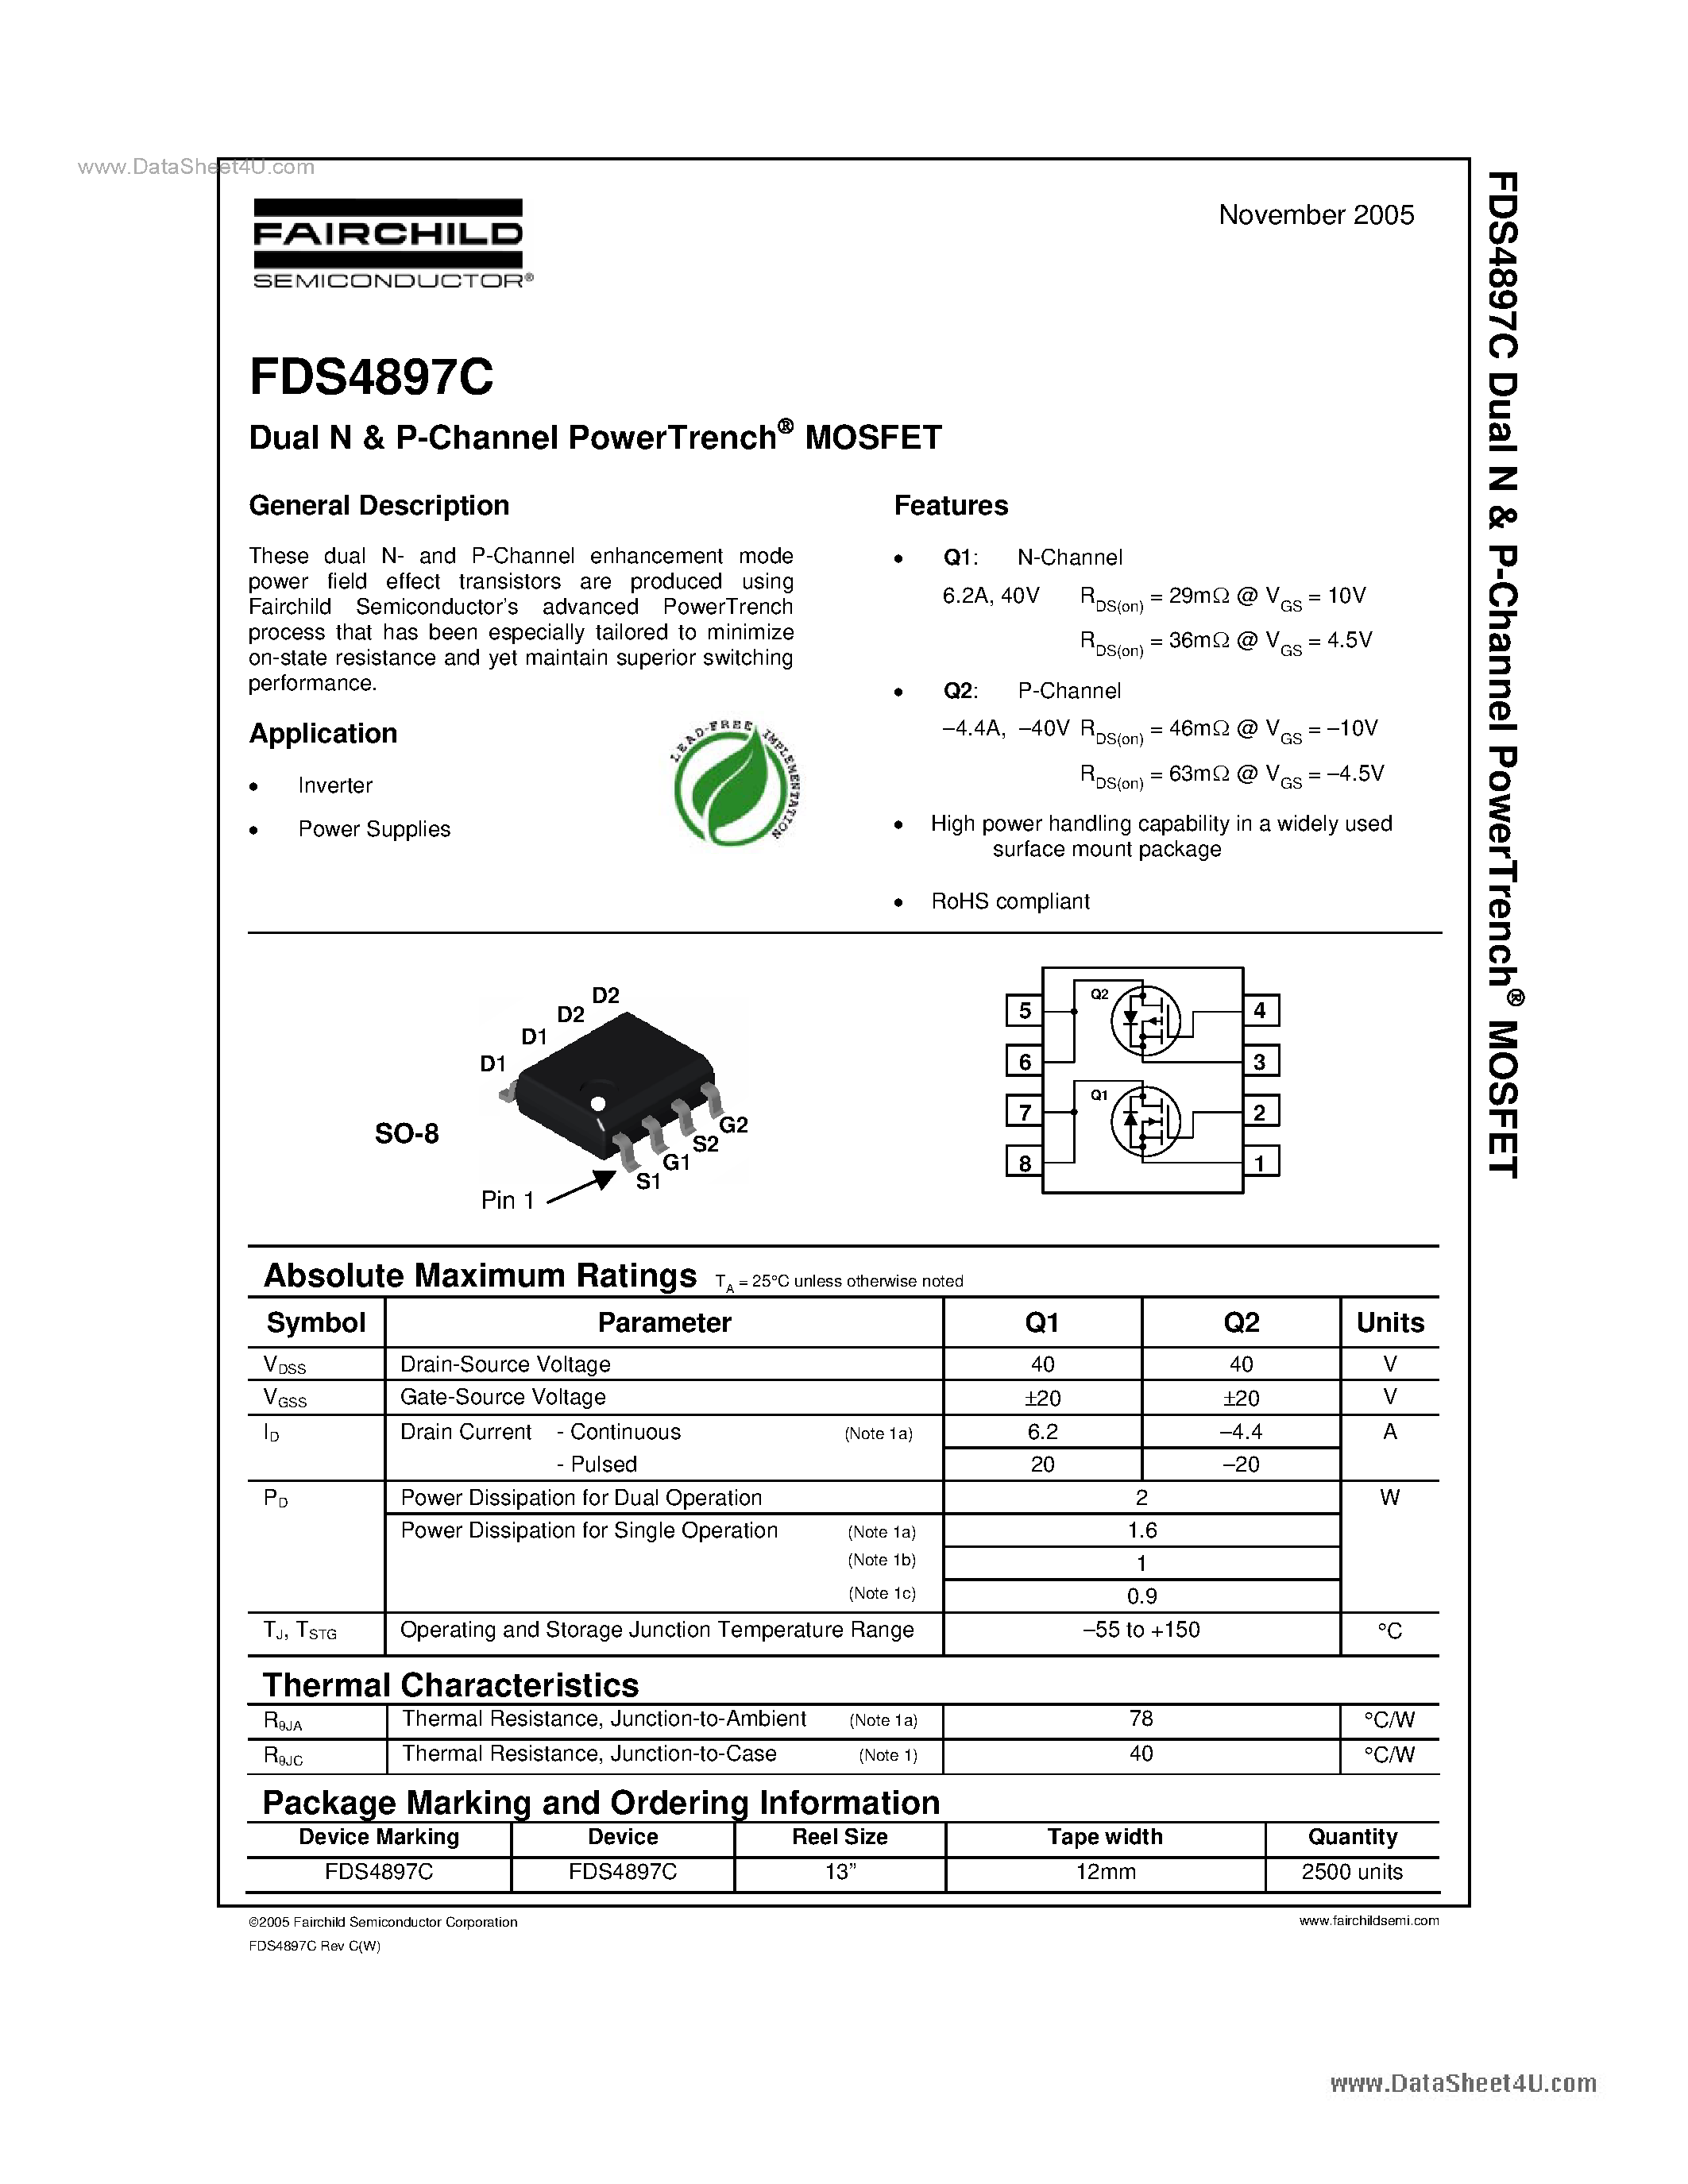 Даташит FDS4897C - Dual N & P-Channel PowerTrench MOSFET страница 1